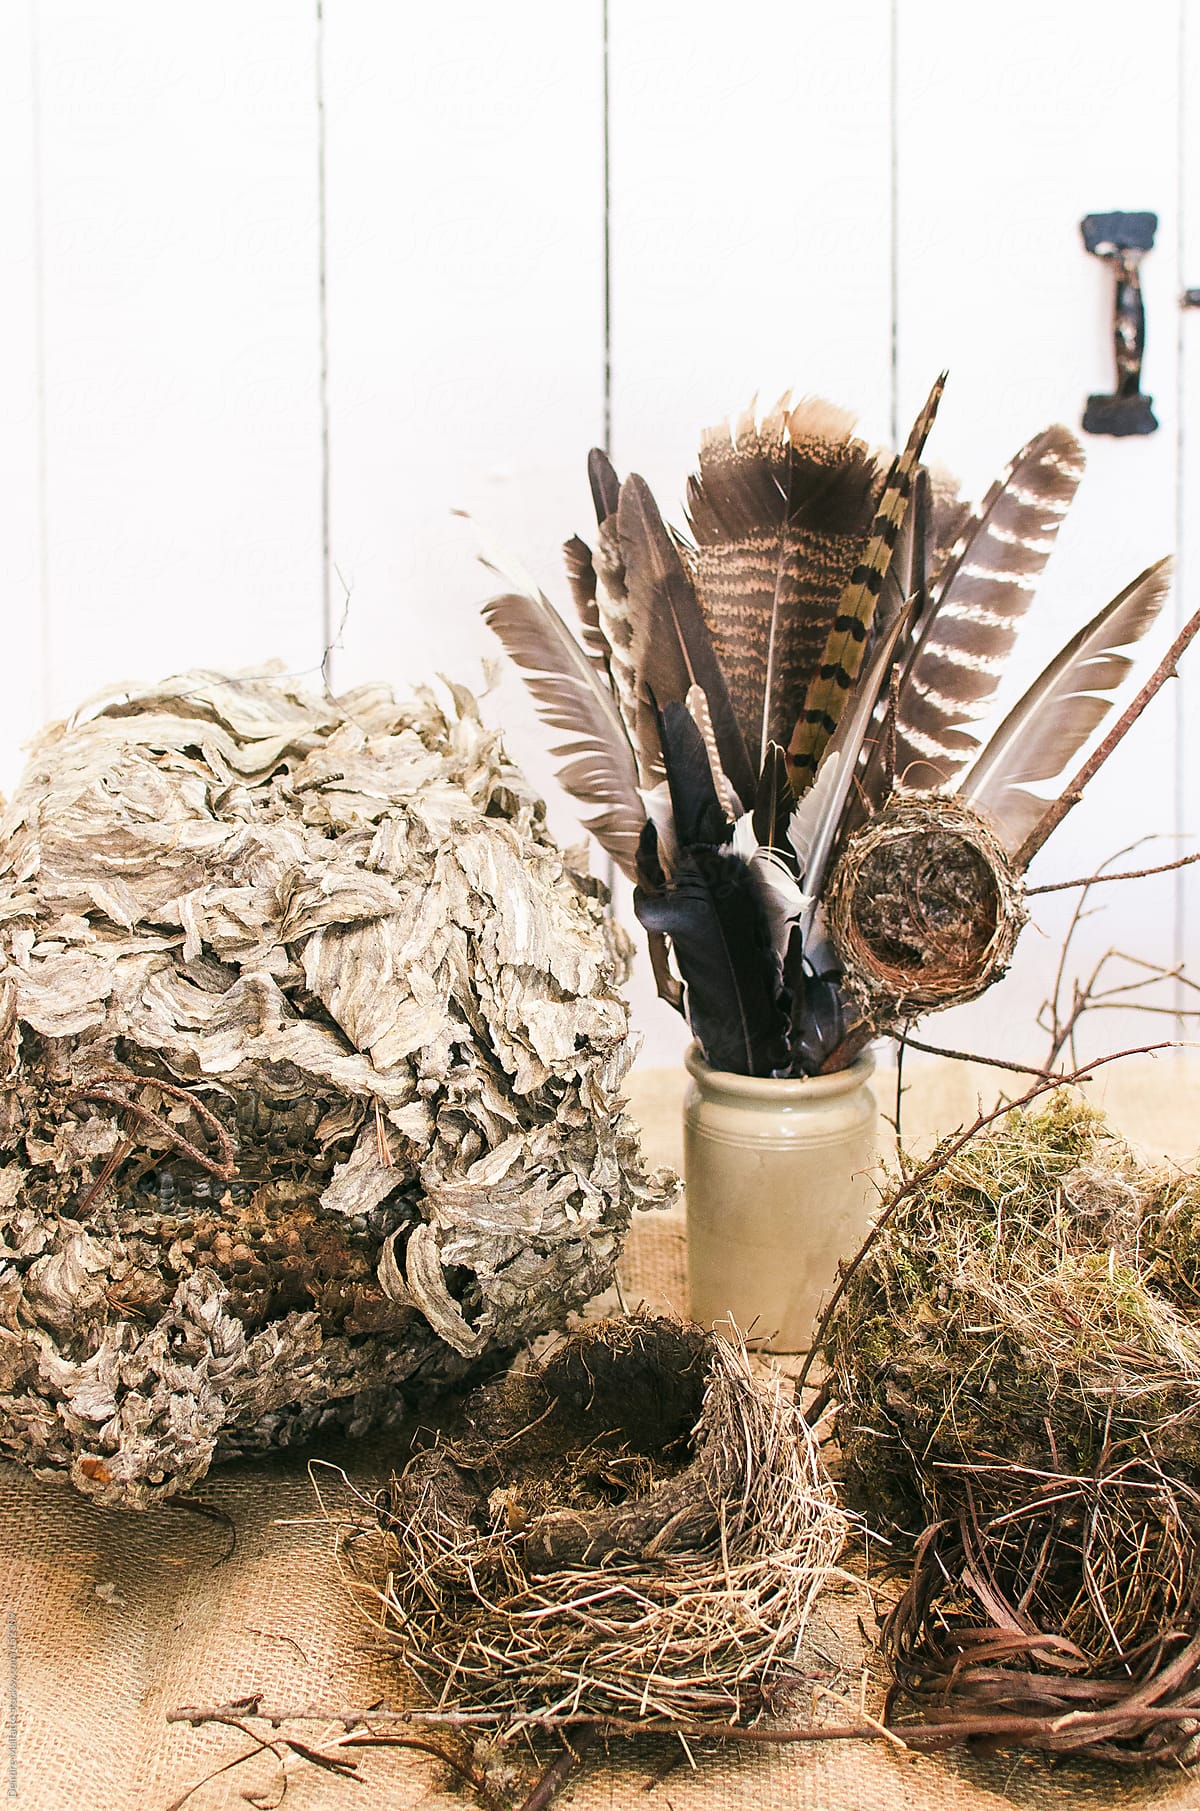 a collection of natural artifacts including nests and feathers